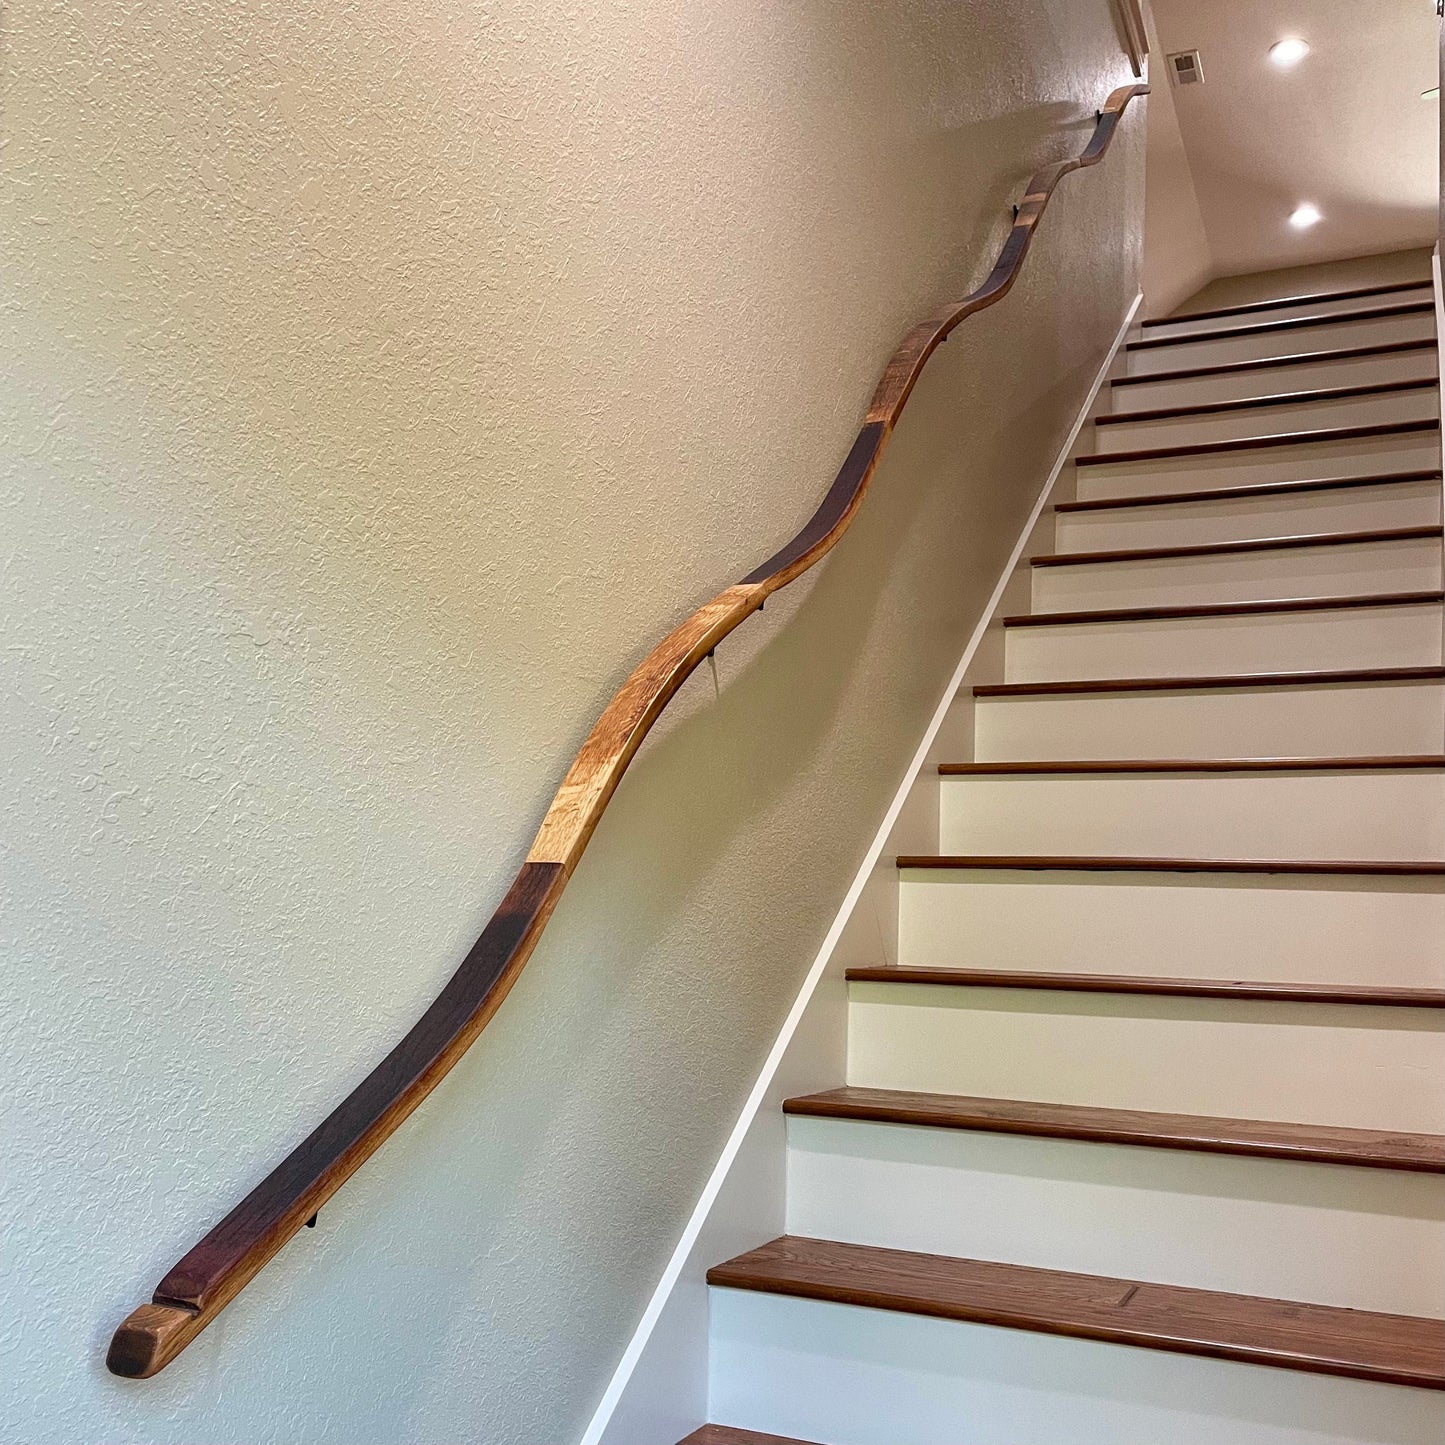 SALE Wine Barrel Stair Handrails - Barana - Made from retired California wine barrels 100% Recycled! 092223-3